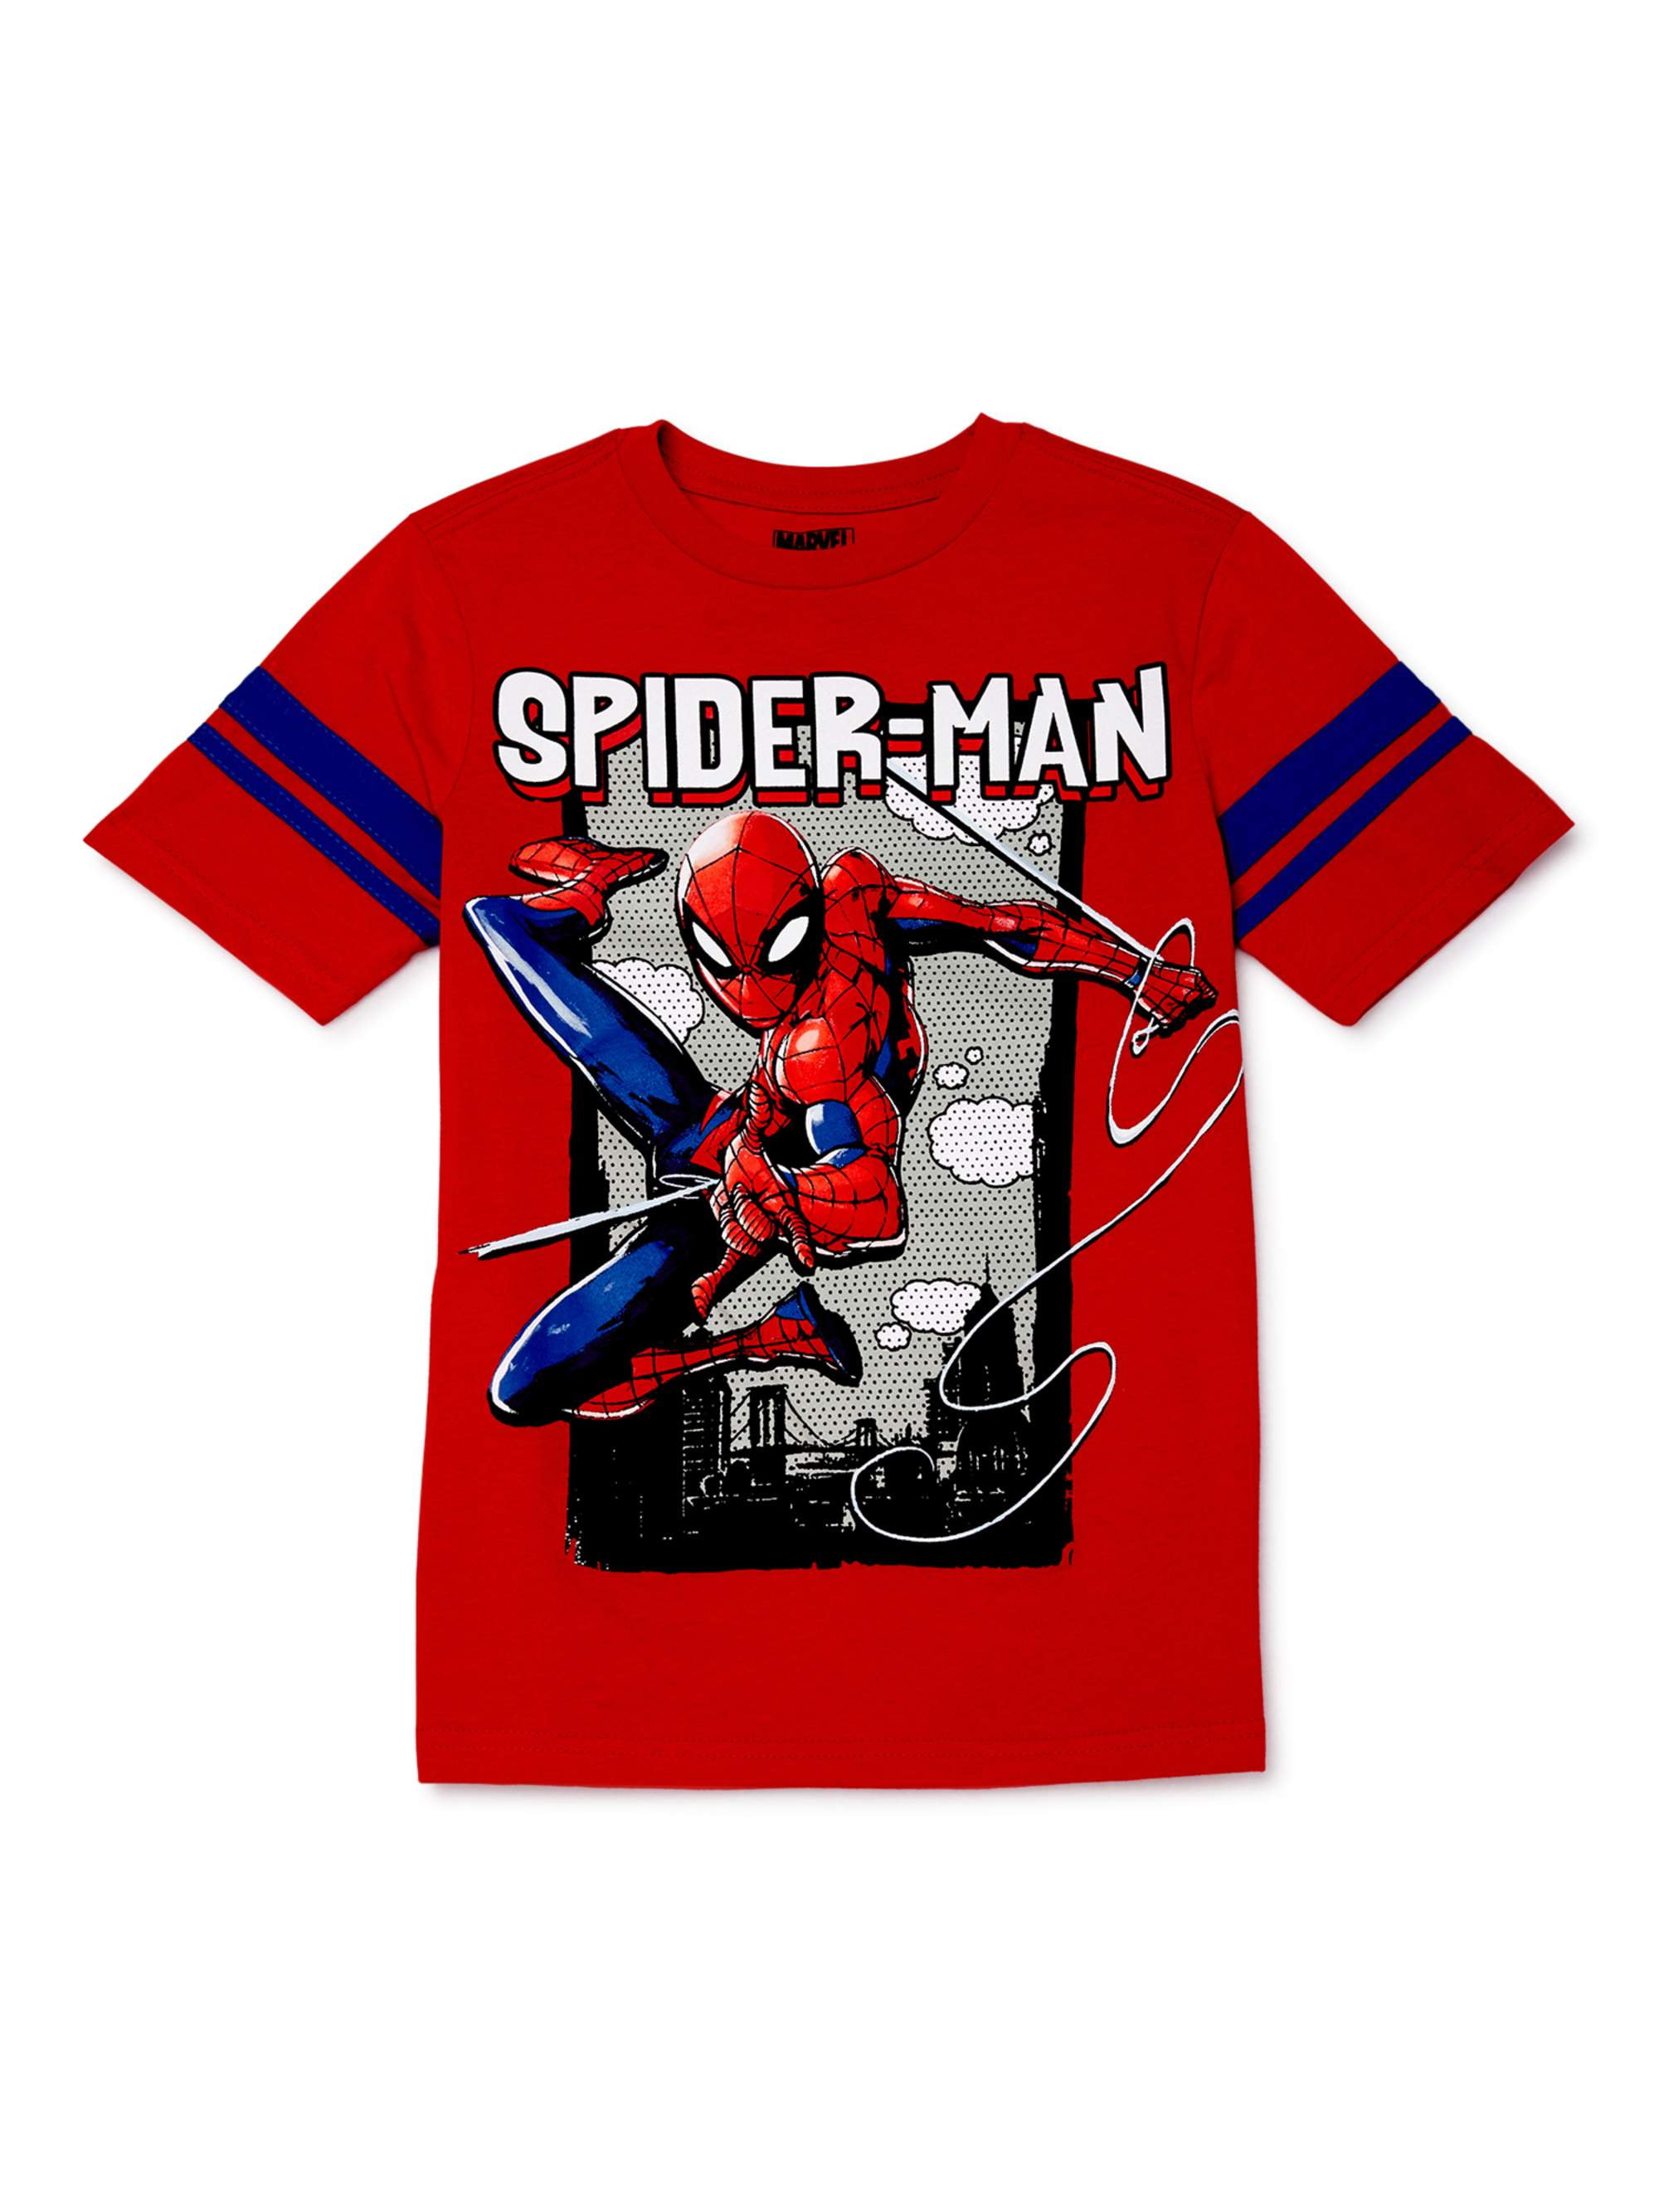 Marvel The Spider-Man Kids Boys Red/Black Shorts Size 5 Free Shipping